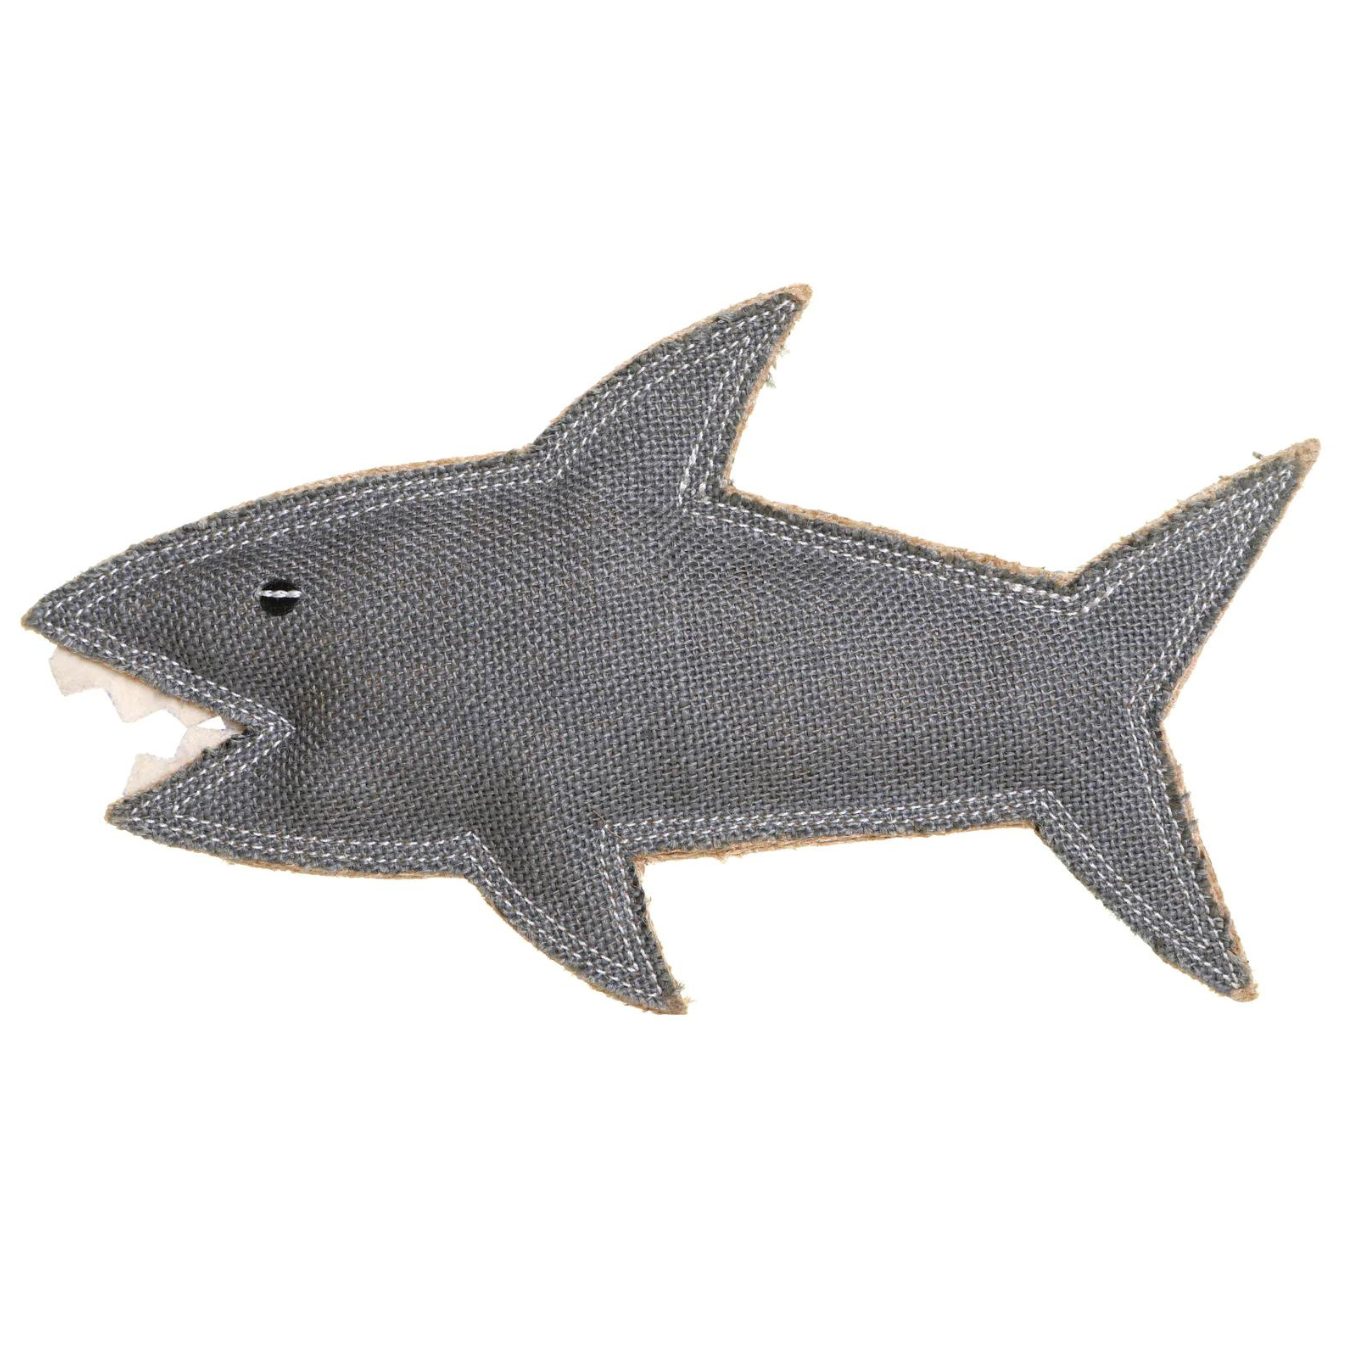 Shazza the shark by outback tails eco friendly dog toy on a white background. Image shows the double stitching and natural jute fabric